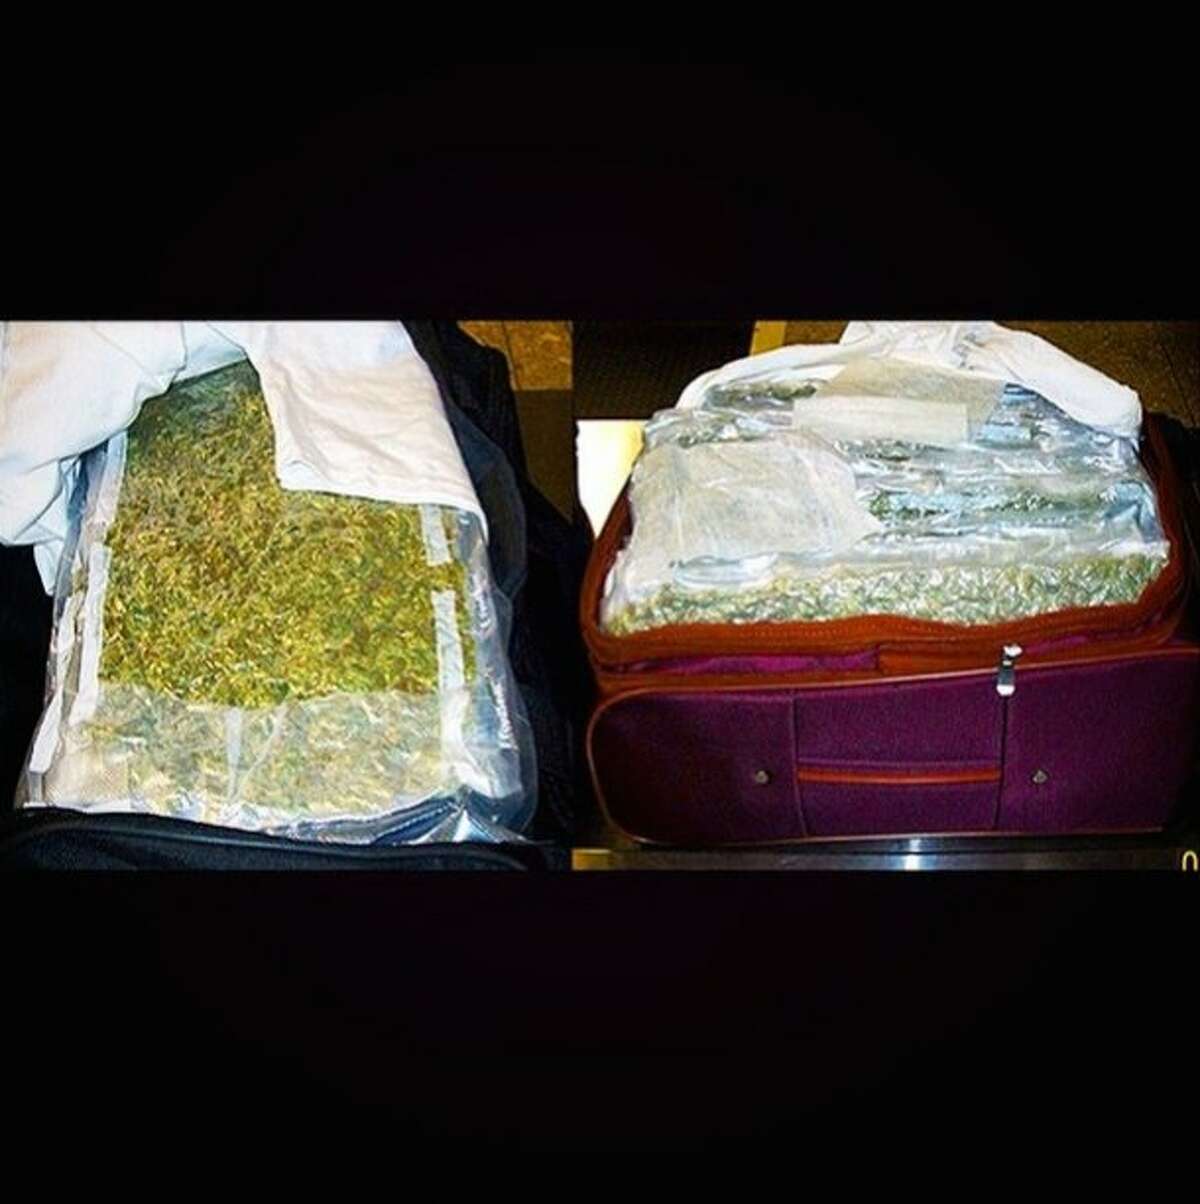 What: "17 clear vacuum-sealed plastic bags of marijuana" Where: Oakland International Airport The post doesn't mention how much the total haul weighs but if you're trying to sneak such large quantities of narcotics on to an airplane, you deserve to get caught. 